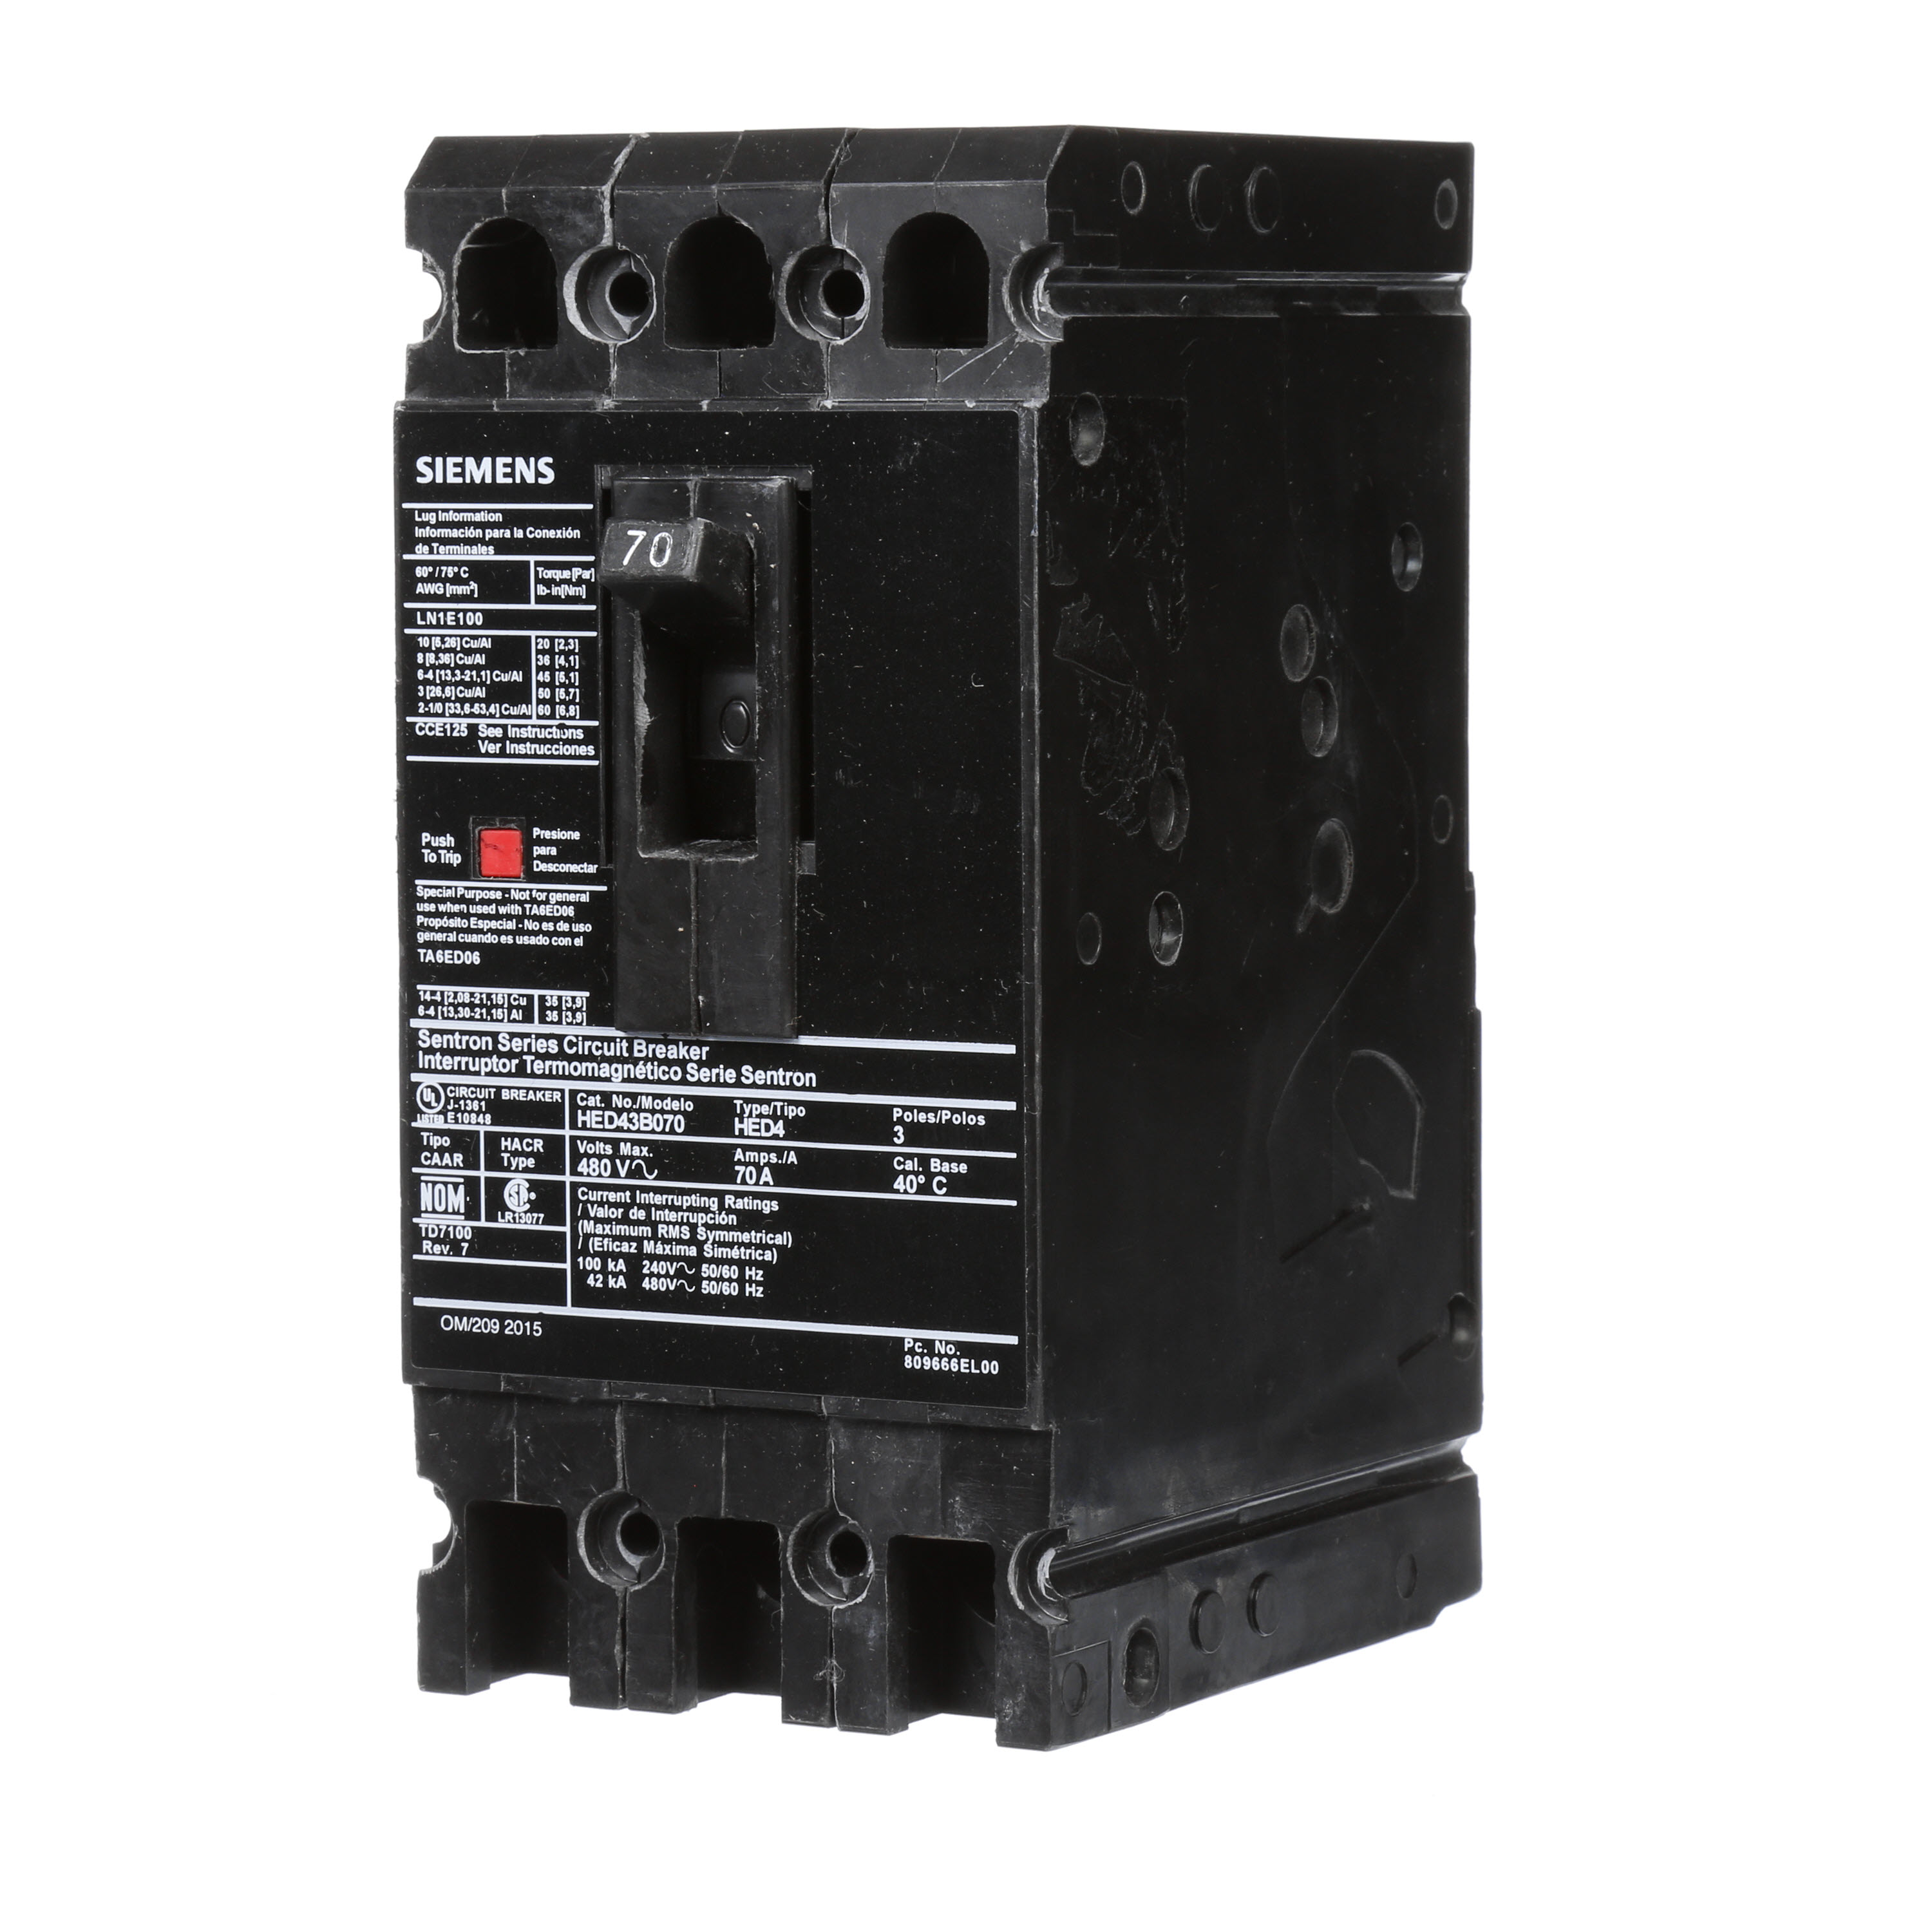 SIEMENS LOW VOLTAGE SENTRON MOLDED CASE CIRCUIT BREAKER WITH THERMAL - MAGNETICTRIP UNIT. STANDARD 40 DEG C BREAKER ED FRAME WITH HIGH BREAKING CAPACITY. 70A 3-POLE (42KAIC AT 480V). NON-INTERCHANGEABLE TRIP UNIT. SPECIAL FEATURES LOAD LUGS ONLY (LN1E100) WIRE RANGE 10 - 1/0AWG (CU/AL). DIMENSIONS (W x H x D) IN 3.00x 6.4 x 3.92.